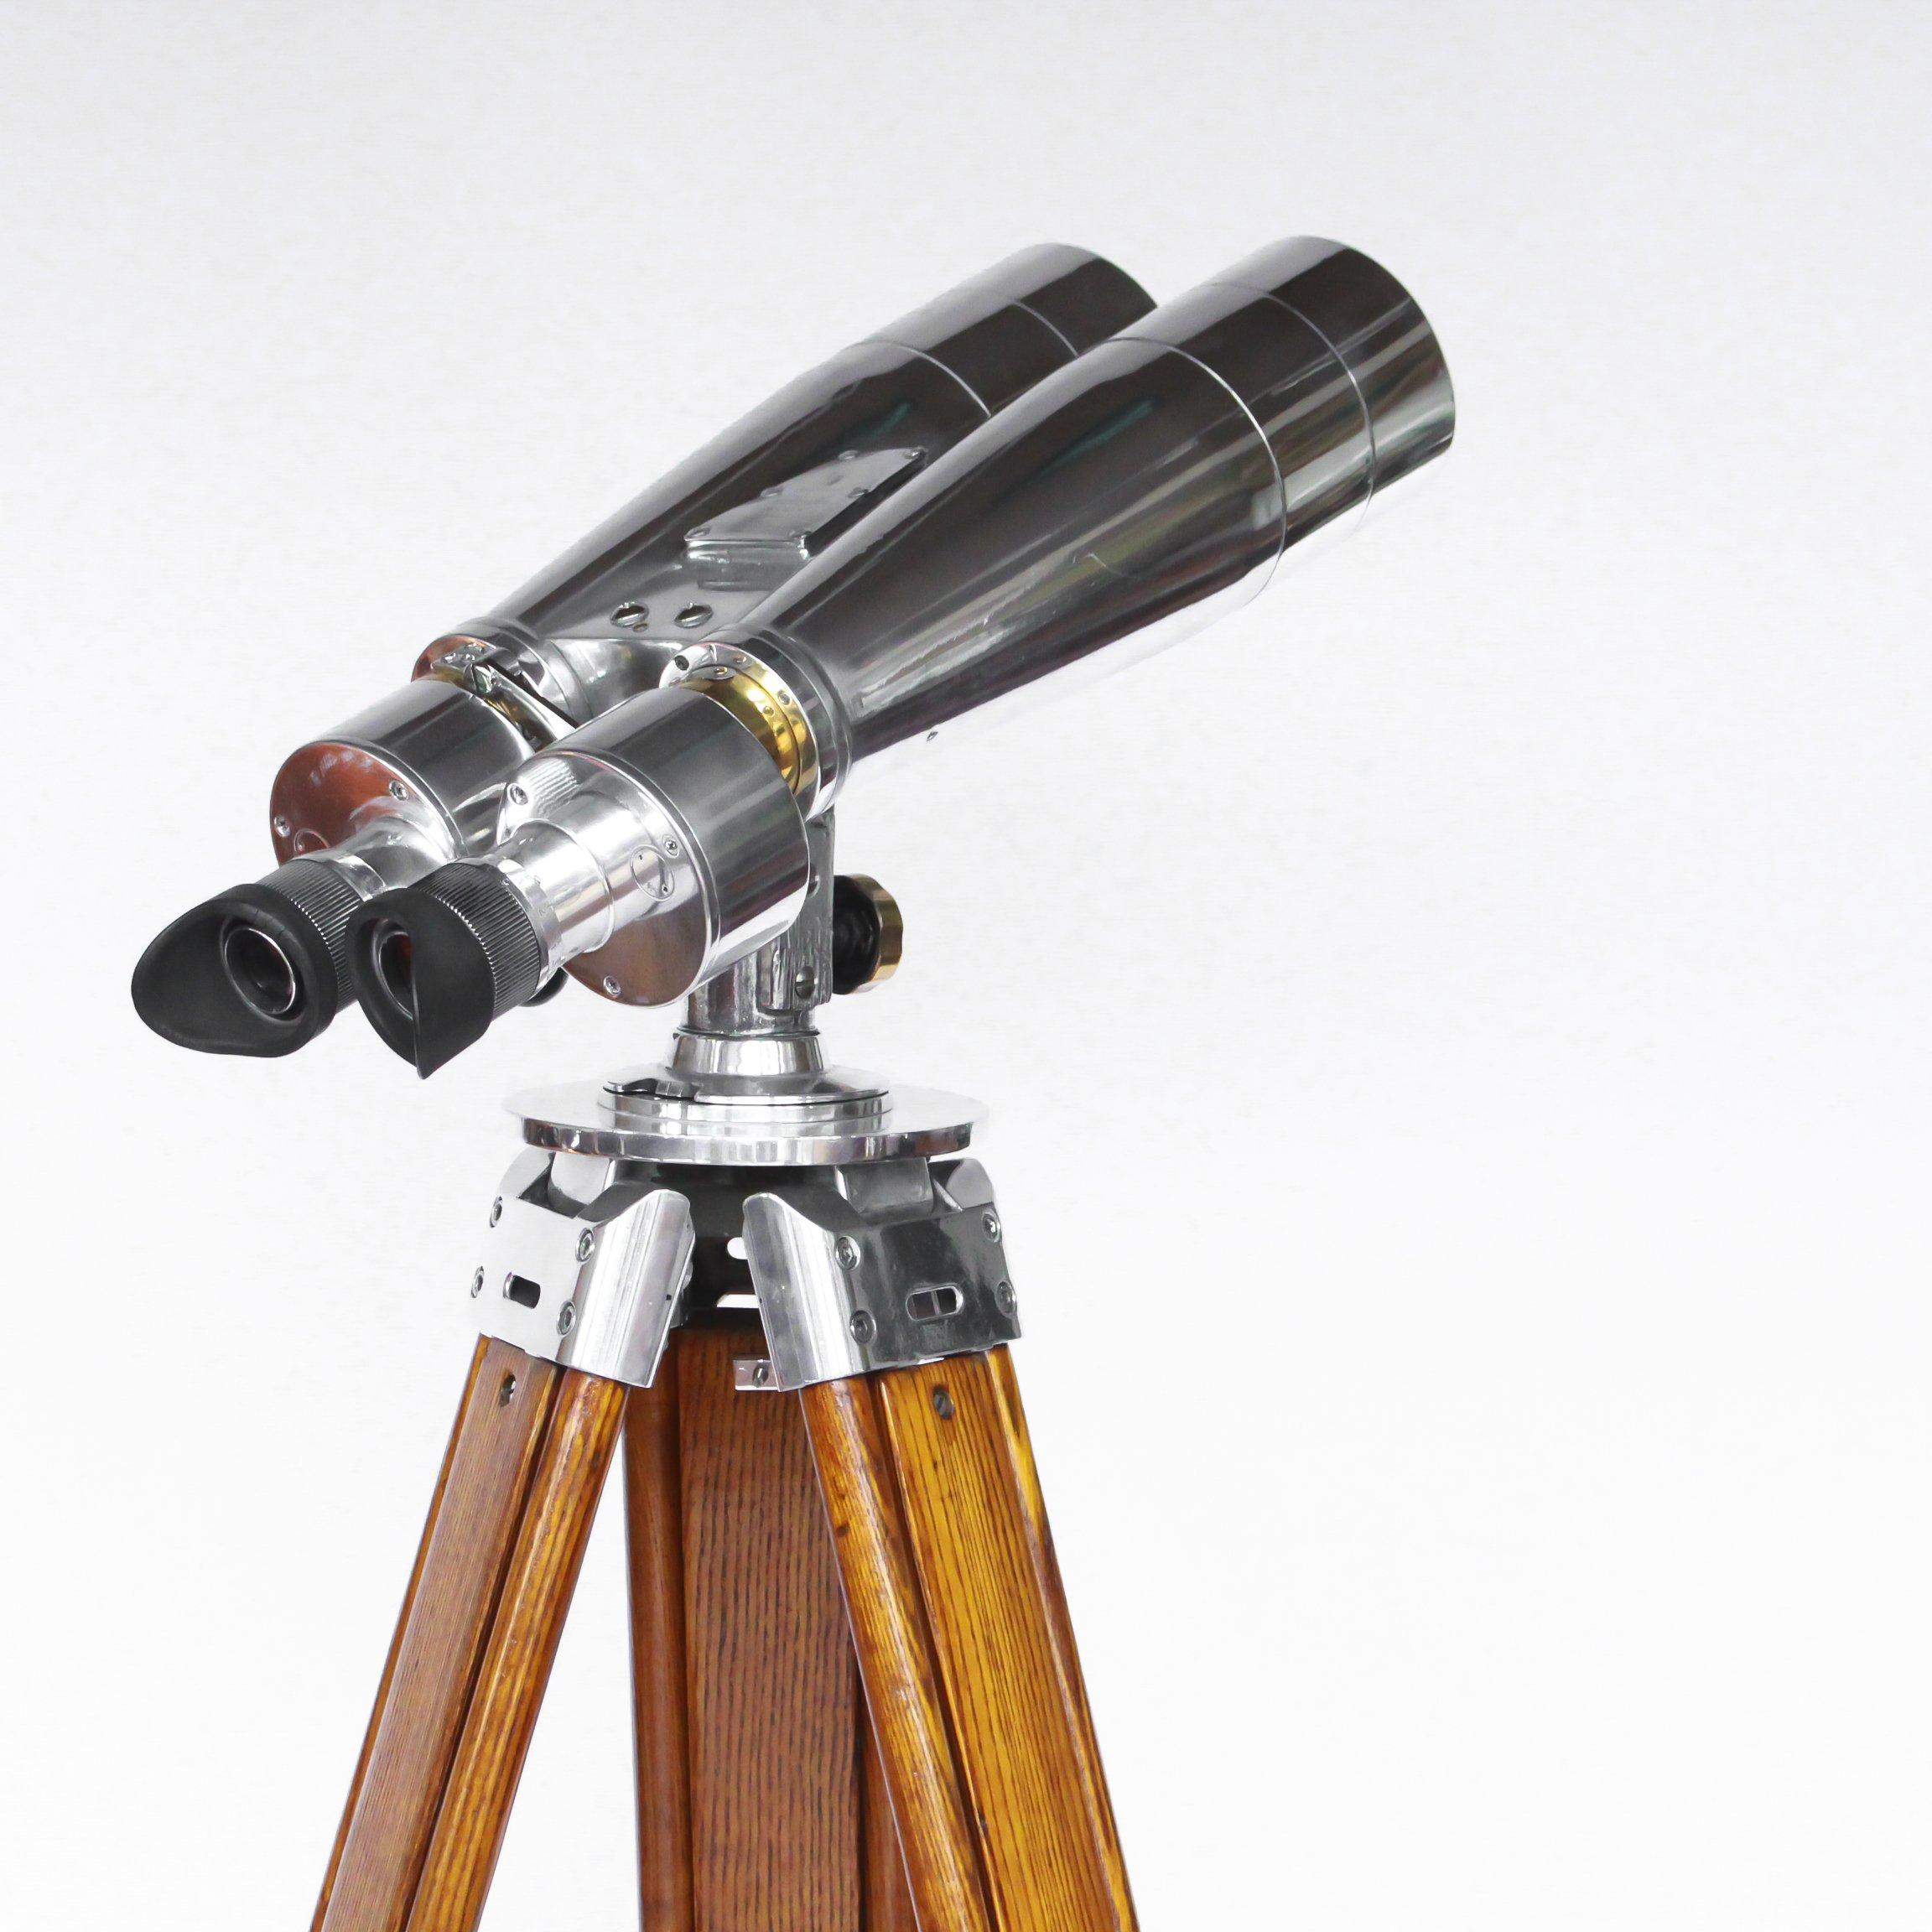 A pair of Fuji Meibo 15x80 marine binoculars on later extending wood and chrome stand with chromed conical feet. 15x magnification with 80mm objective lens.
Stamped Fuji Meibo and numbered

Dimensions: H 120cm - 190cm W 89cm D 35cm 

Origin: